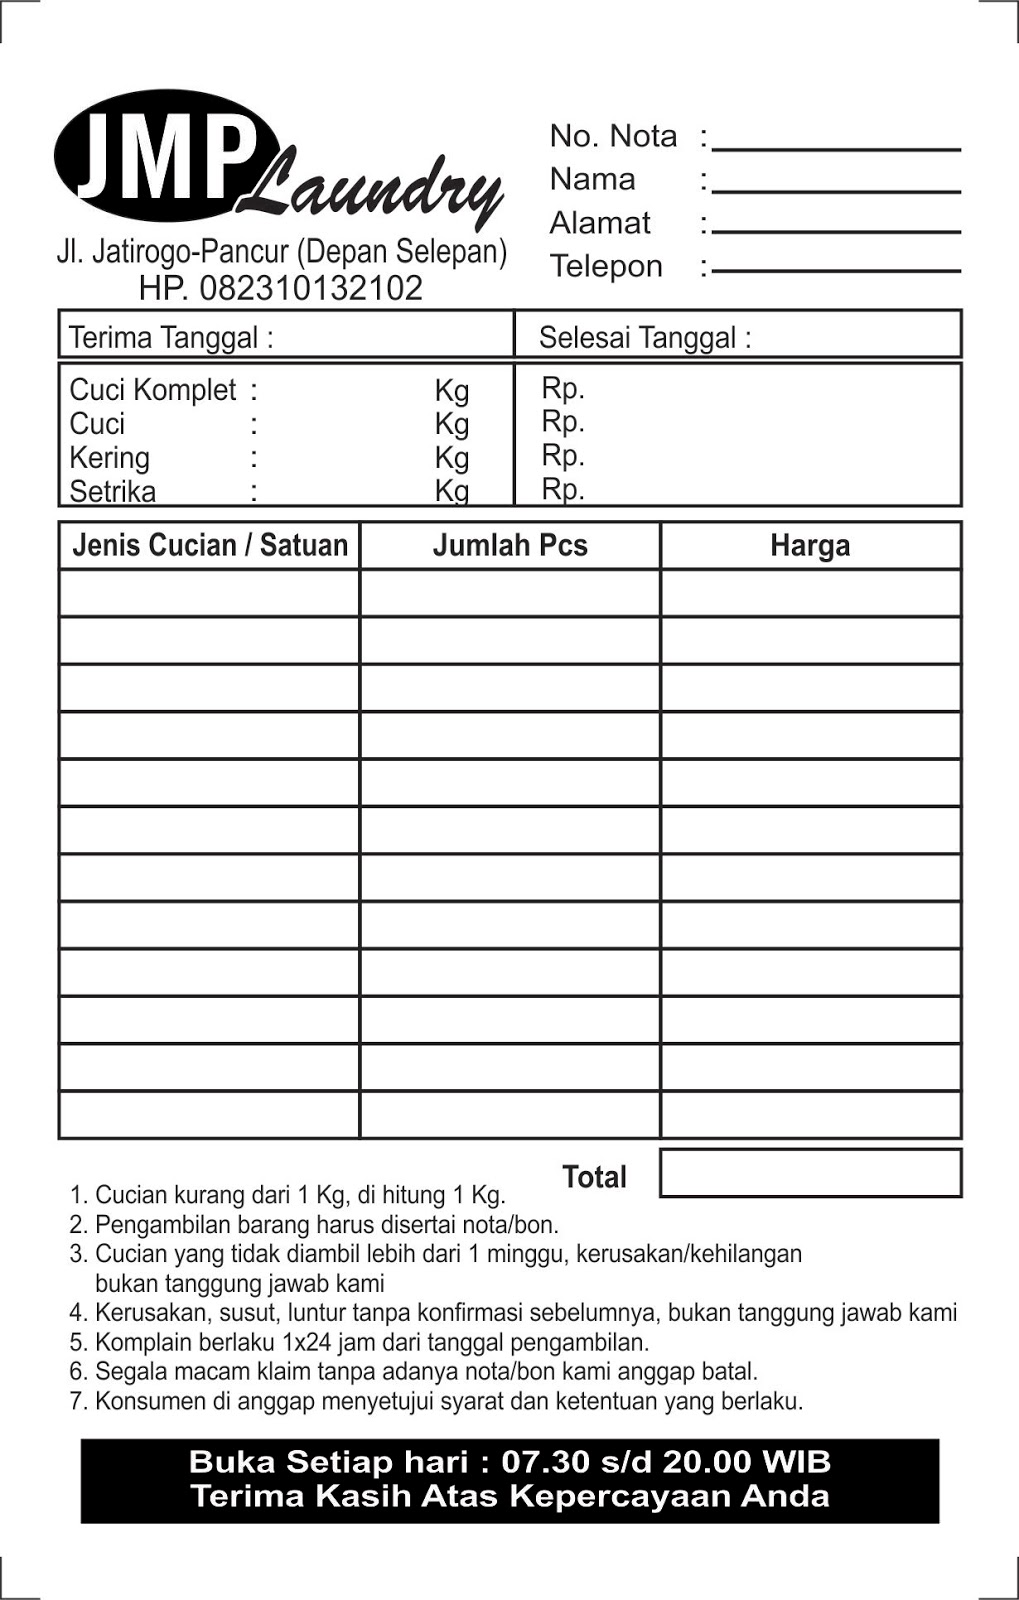 Download Template Nota Format CDR